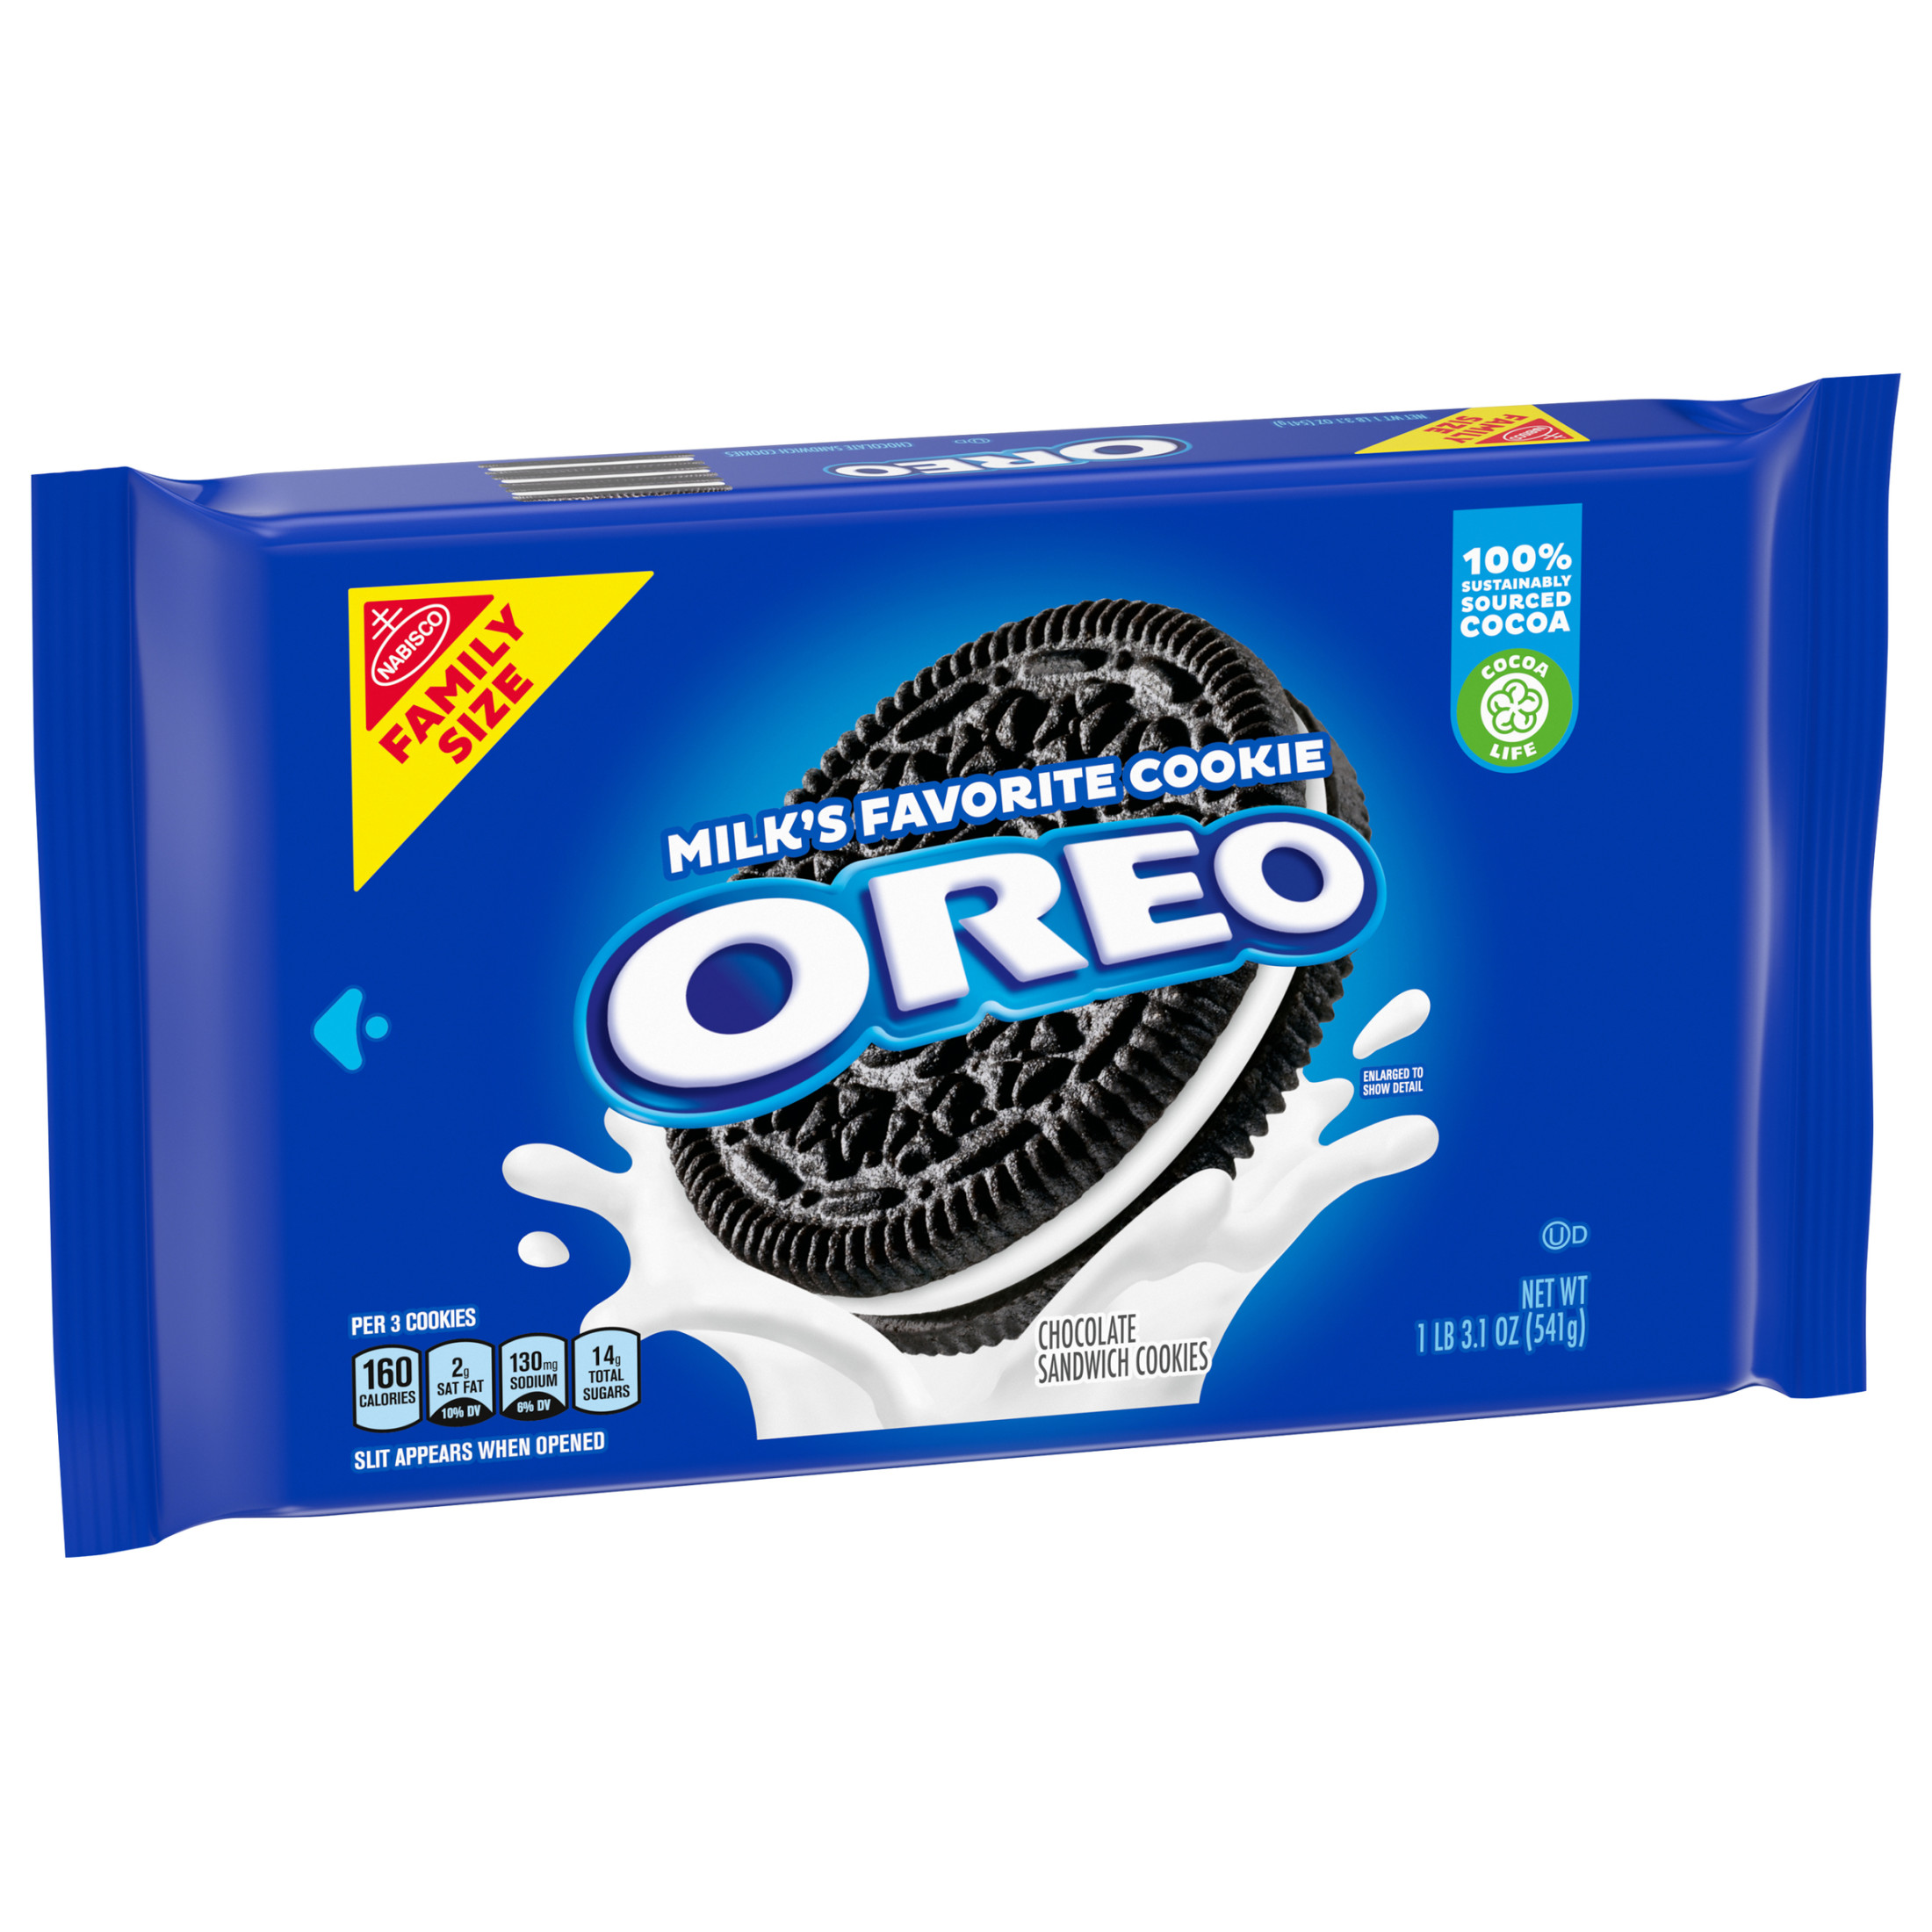 OREO Chocolate Sandwich Cookies, Family Size, 19.1 oz - image 3 of 15